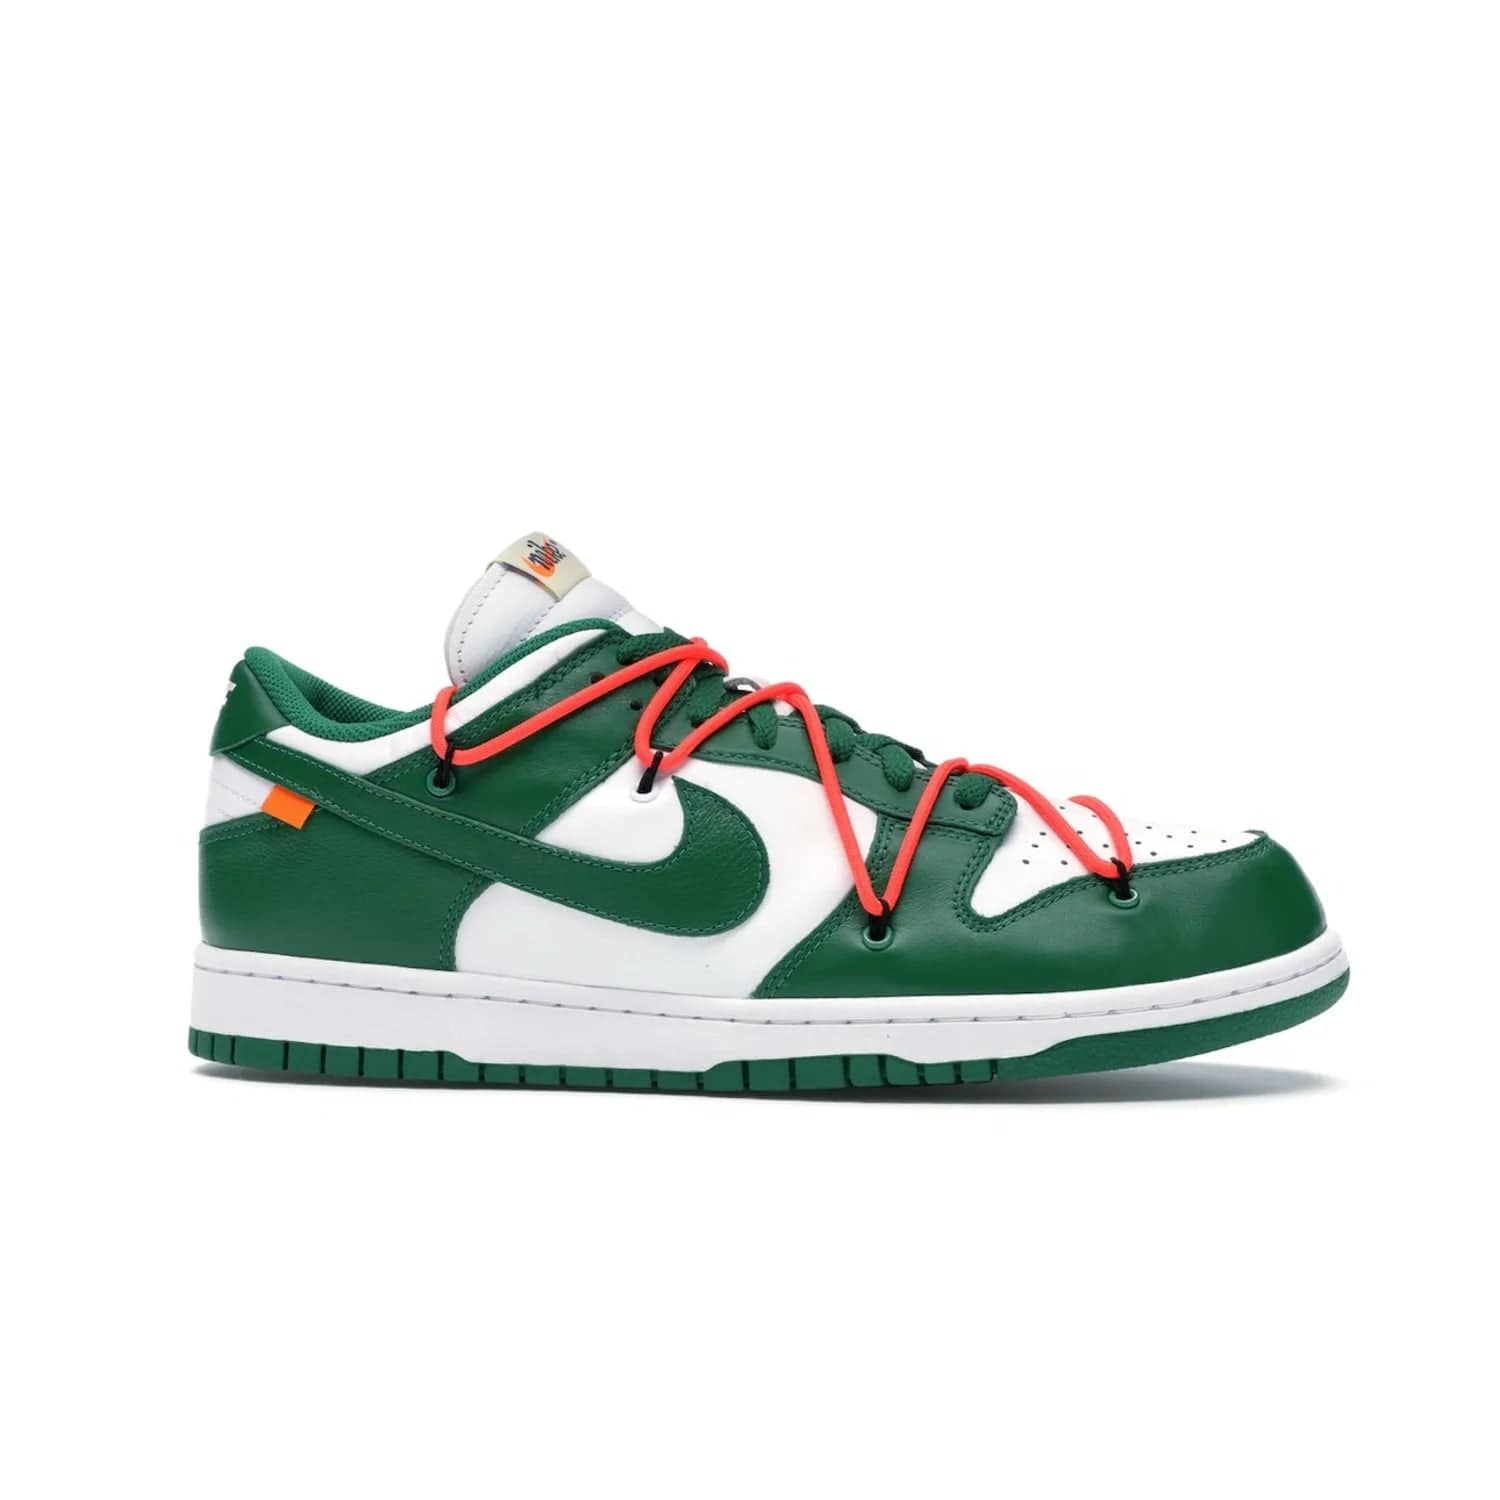 Nike Dunk Low Off-White Pine Green - Image 2 - Only at www.BallersClubKickz.com - The Nike Dunk Low Off-White Pine Green combines classic 1980s style with modern-day design. Featuring white leather uppers and pine green overlays, these classic kicks feature secondary lacing system, zip-ties and signature Off-White text. Releasing in December 2019, these shoes are a timeless classic for any wardrobe.